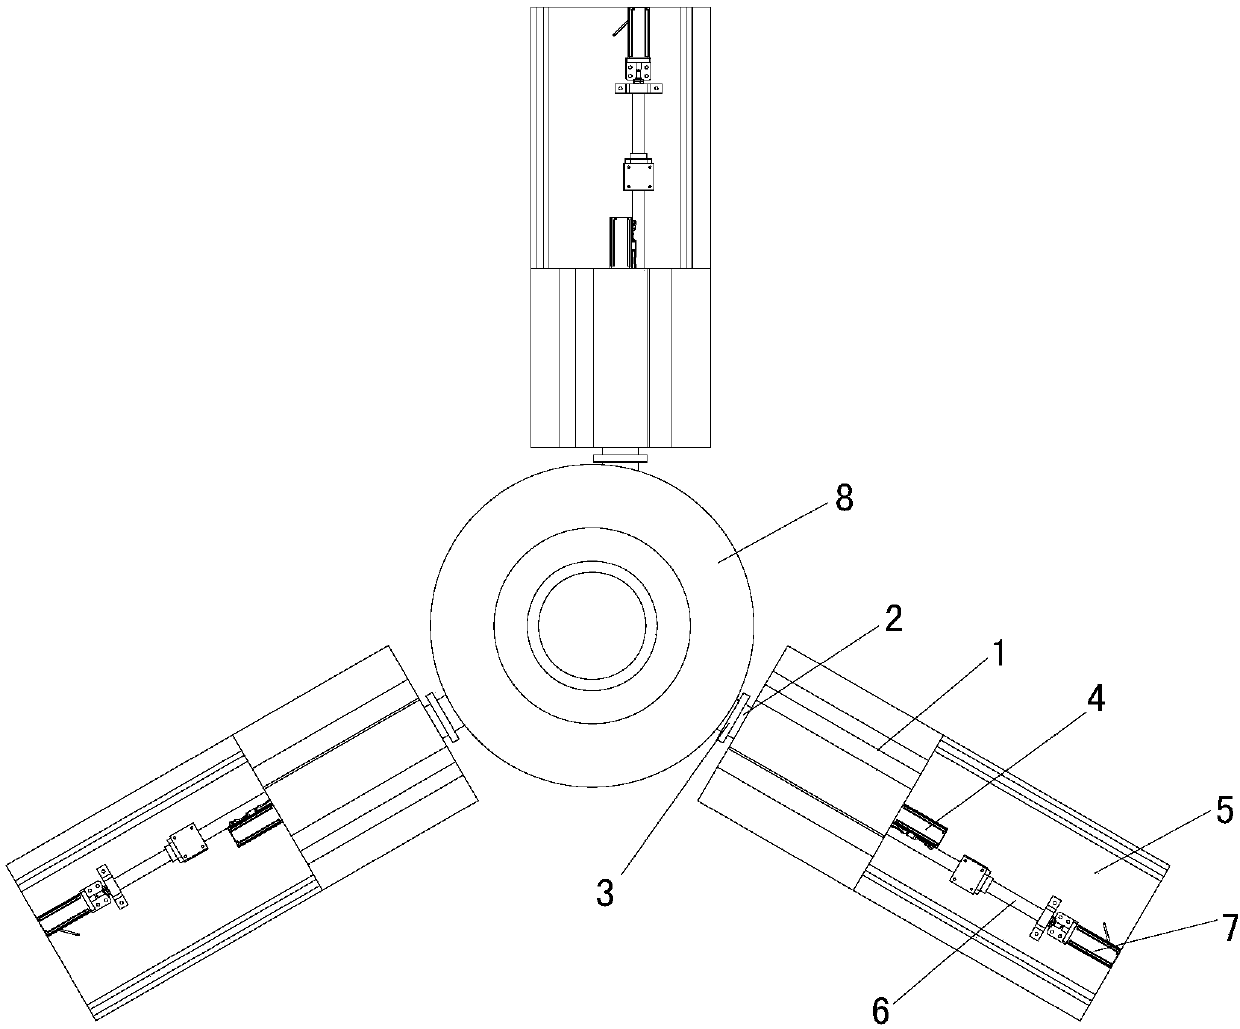 Three-point positioning rotation platform for track wheel measurement supporting